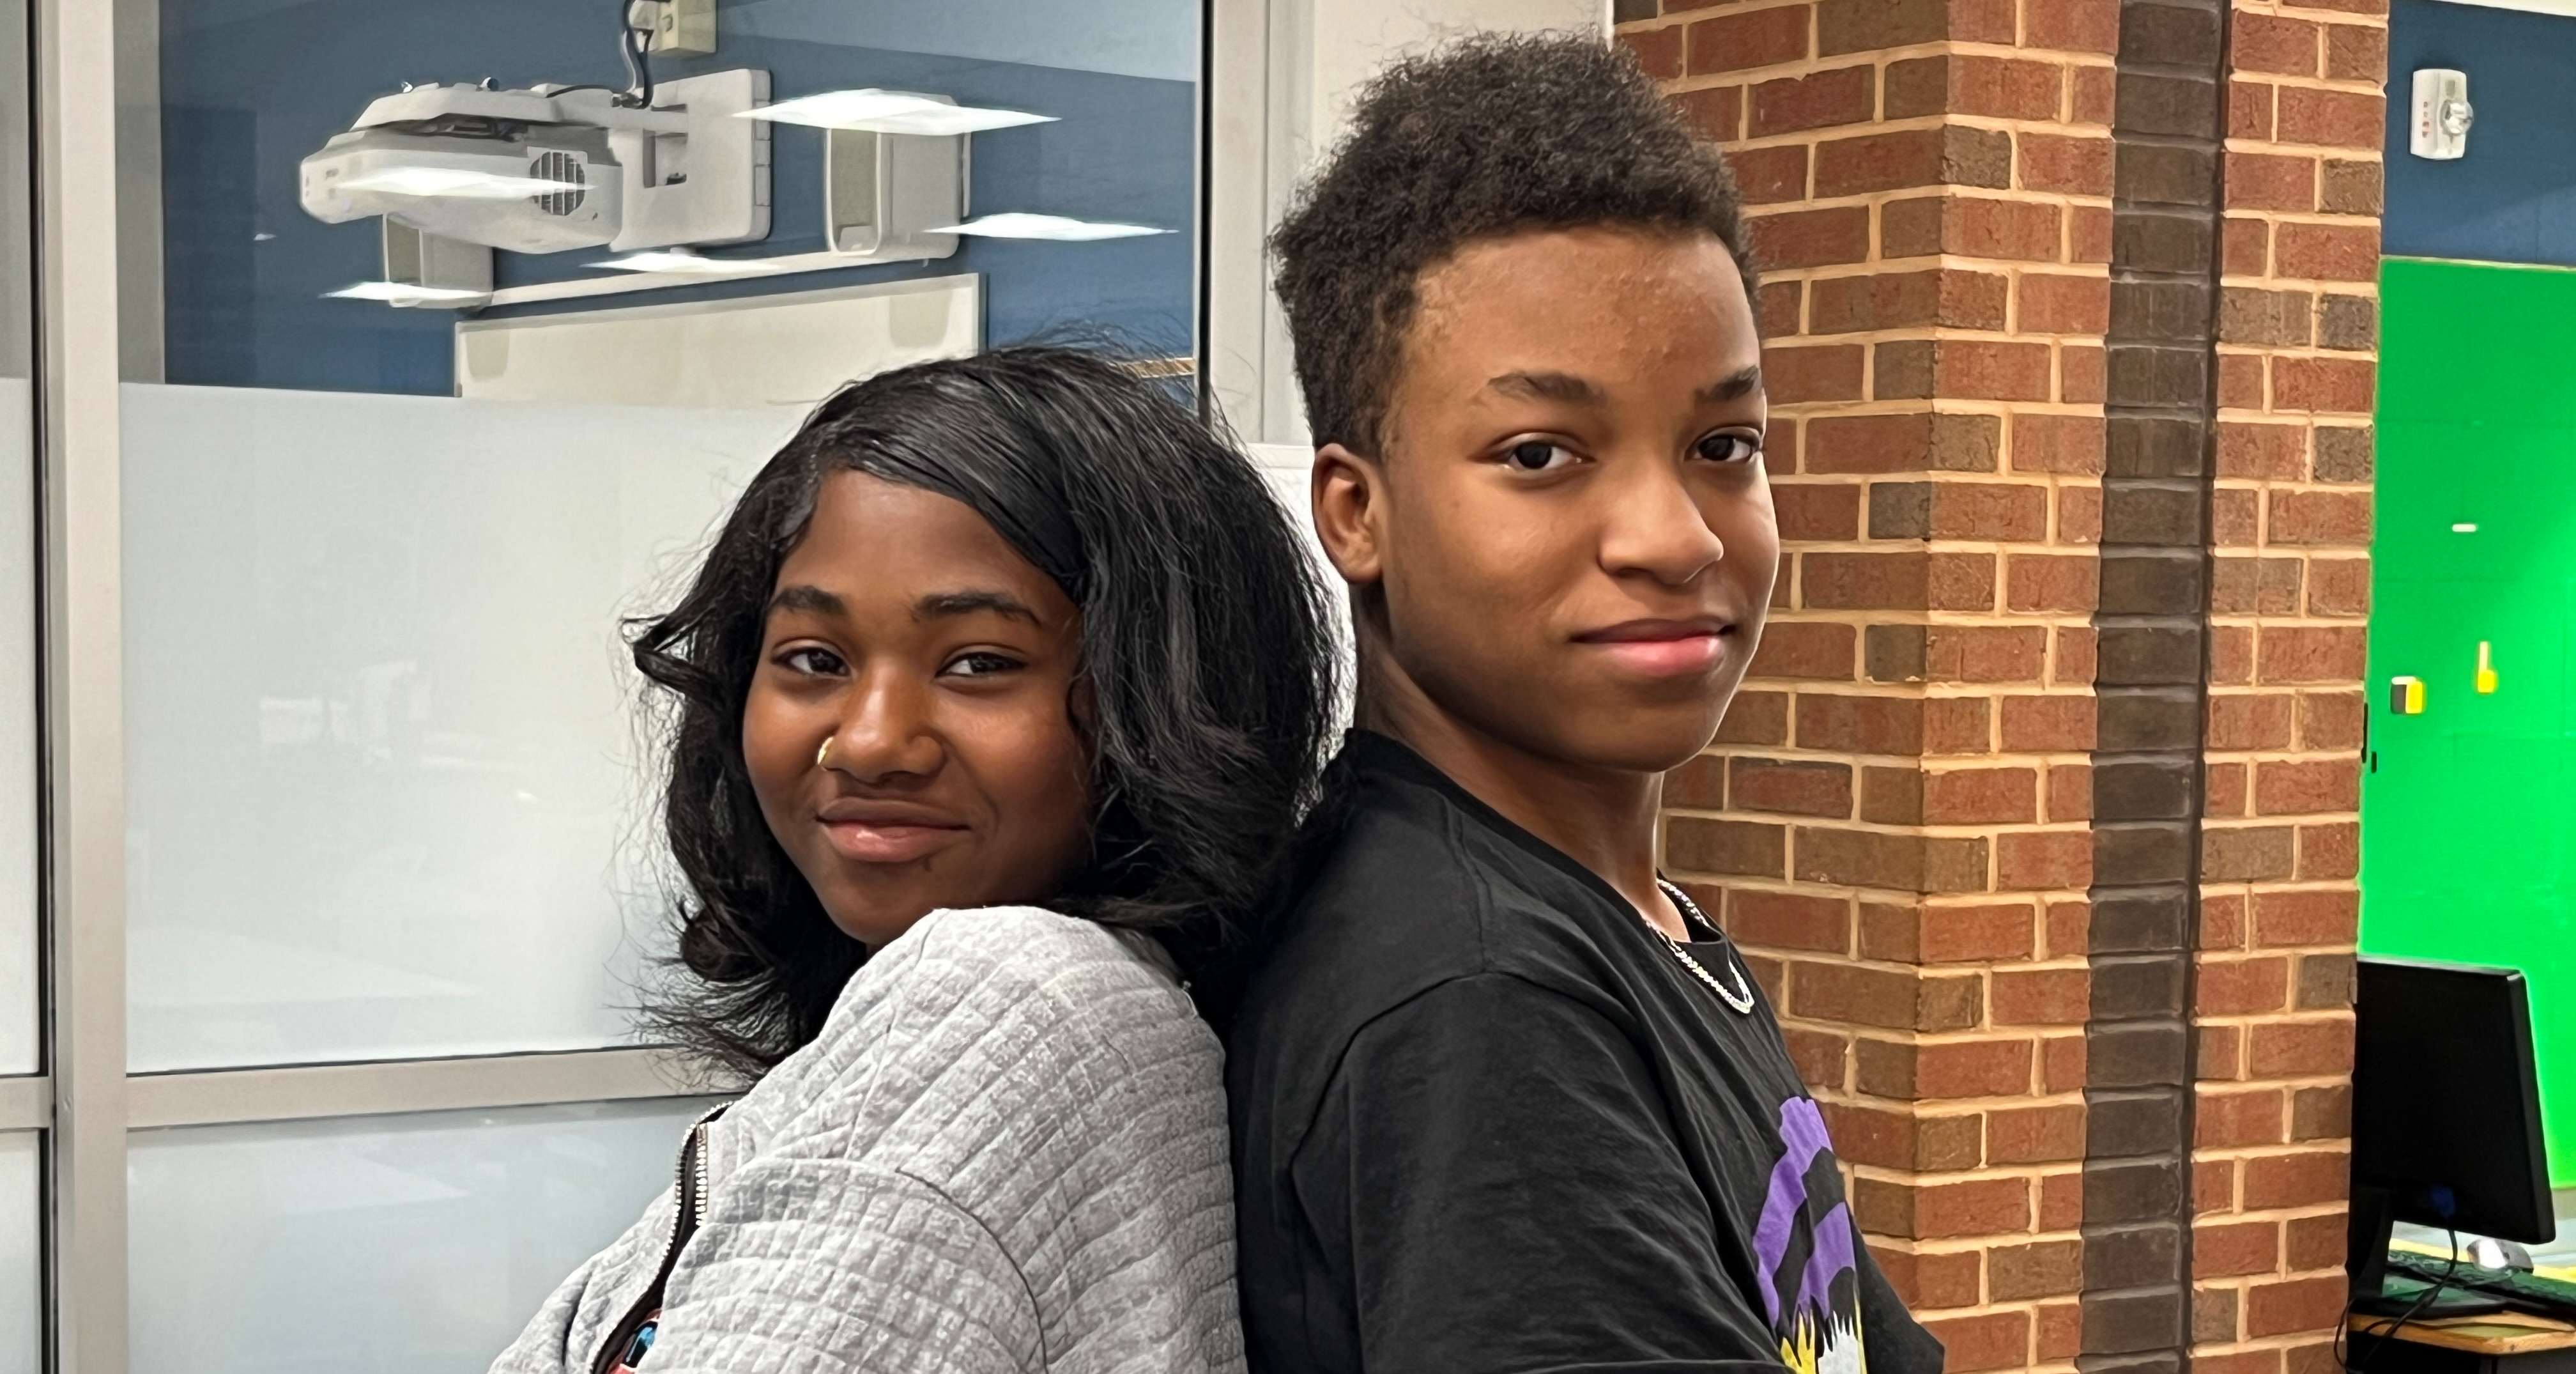 Two students leaning back-to-back posing for a photo